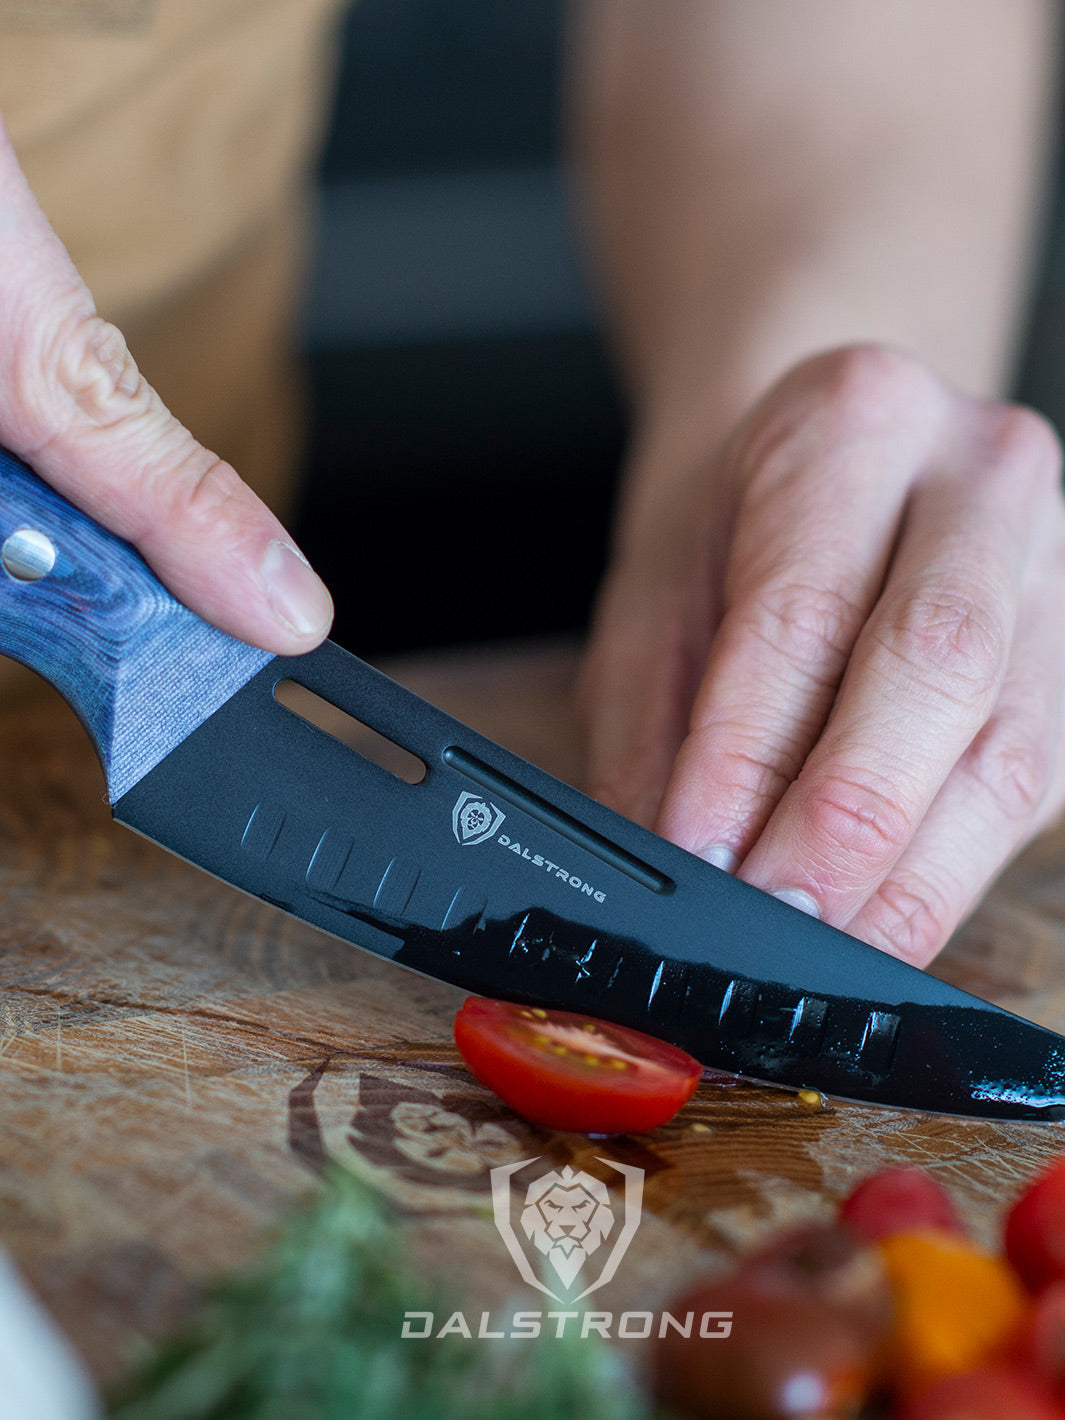 Dalstrong delta wolf series 6 inch curved fillet knife with a tomato cut in half.